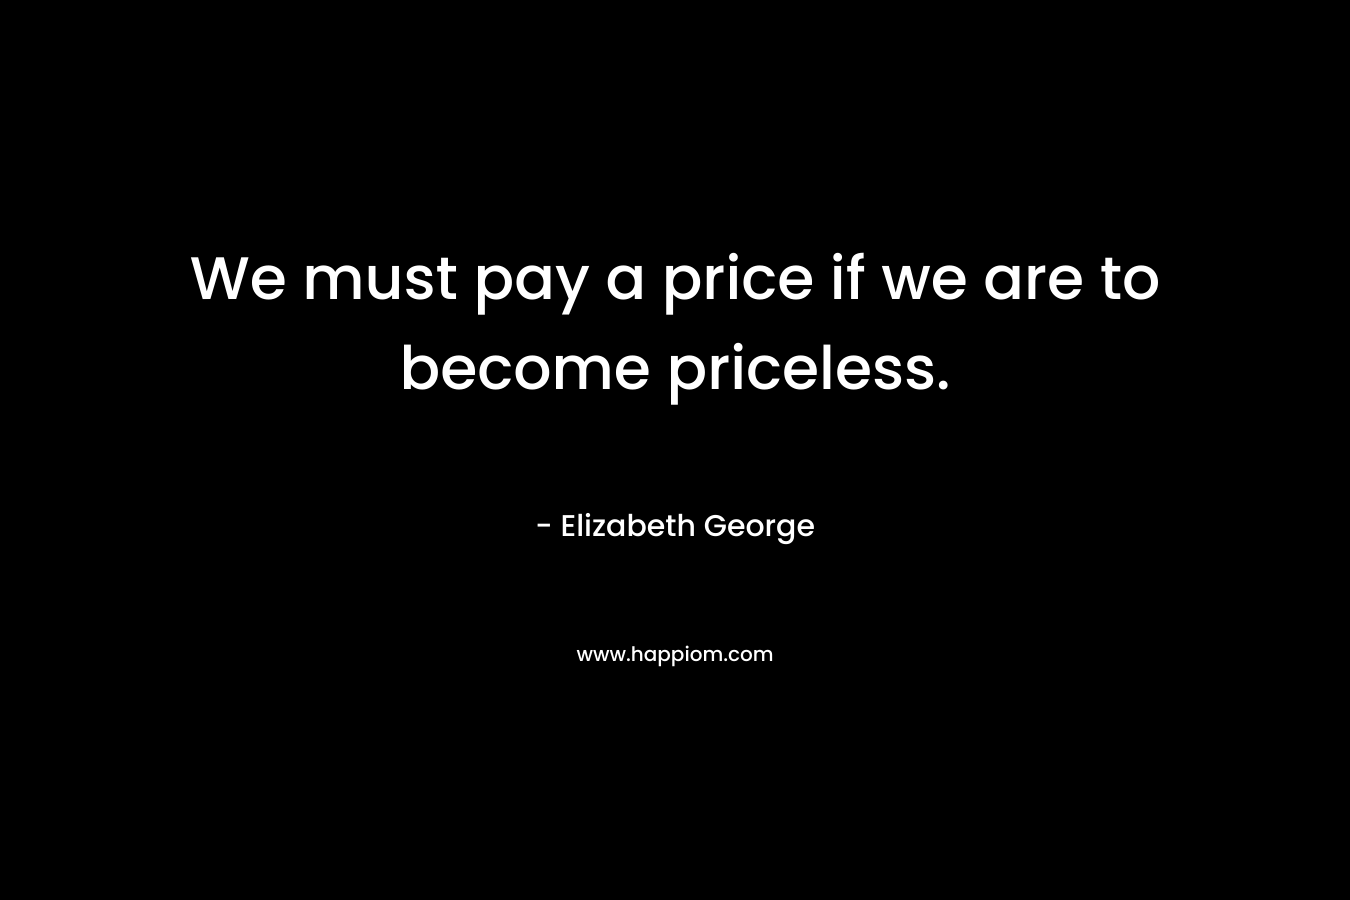 We must pay a price if we are to become priceless.